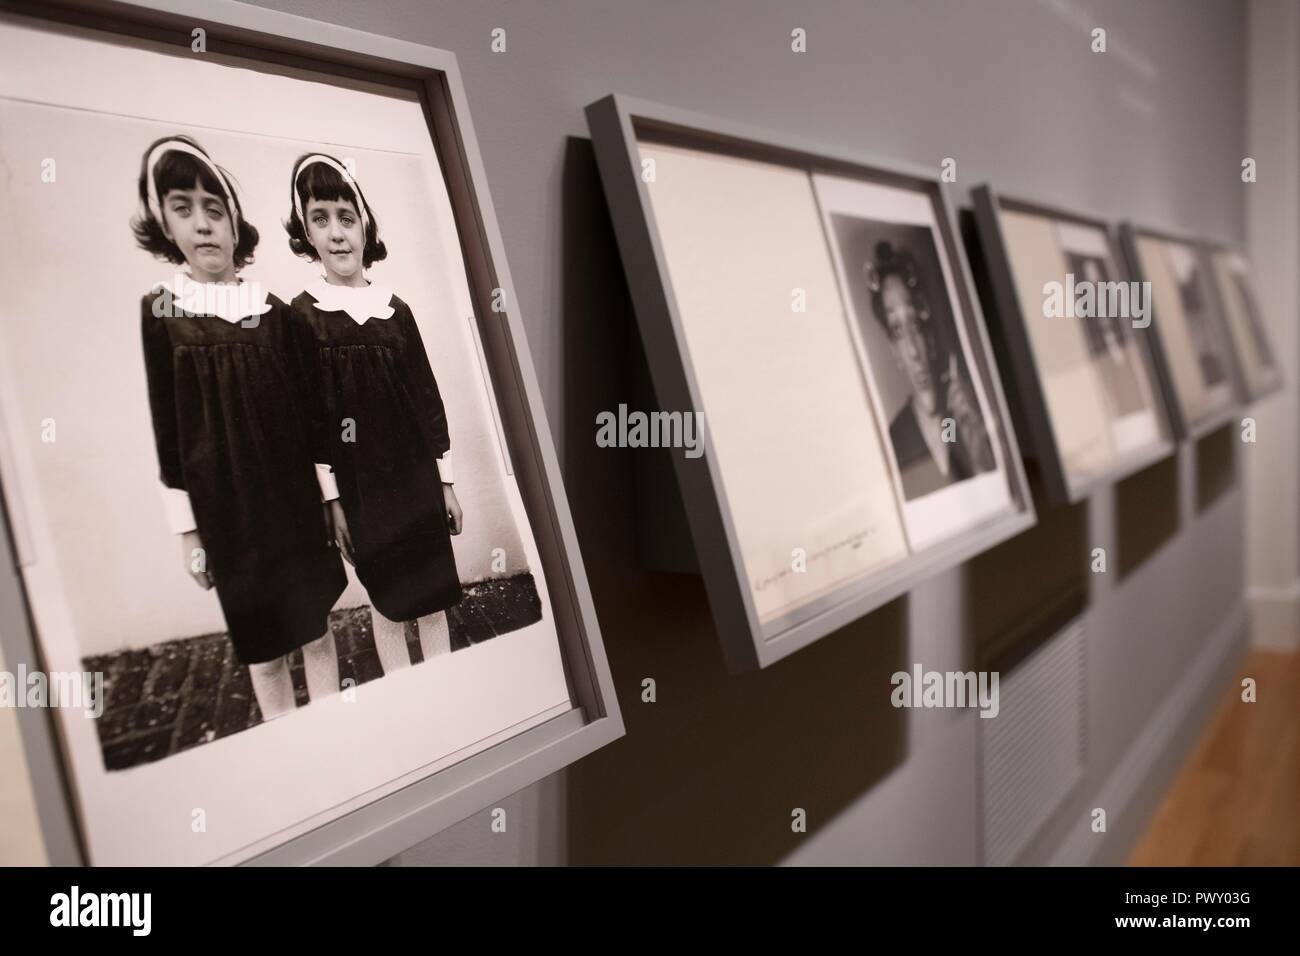 Washington, DC, USA. 17th Oct, 2018. Photo taken on Oct. 17, 2018 shows artworks exhibited at the Smithsonian American Art Museum in Washington, DC, the United States. The exhibition showed Diane Arbus's portfolio titled 'A box of ten photographs' which she has been working on since 1969. Credit: Liu Jie/Xinhua/Alamy Live News Stock Photo